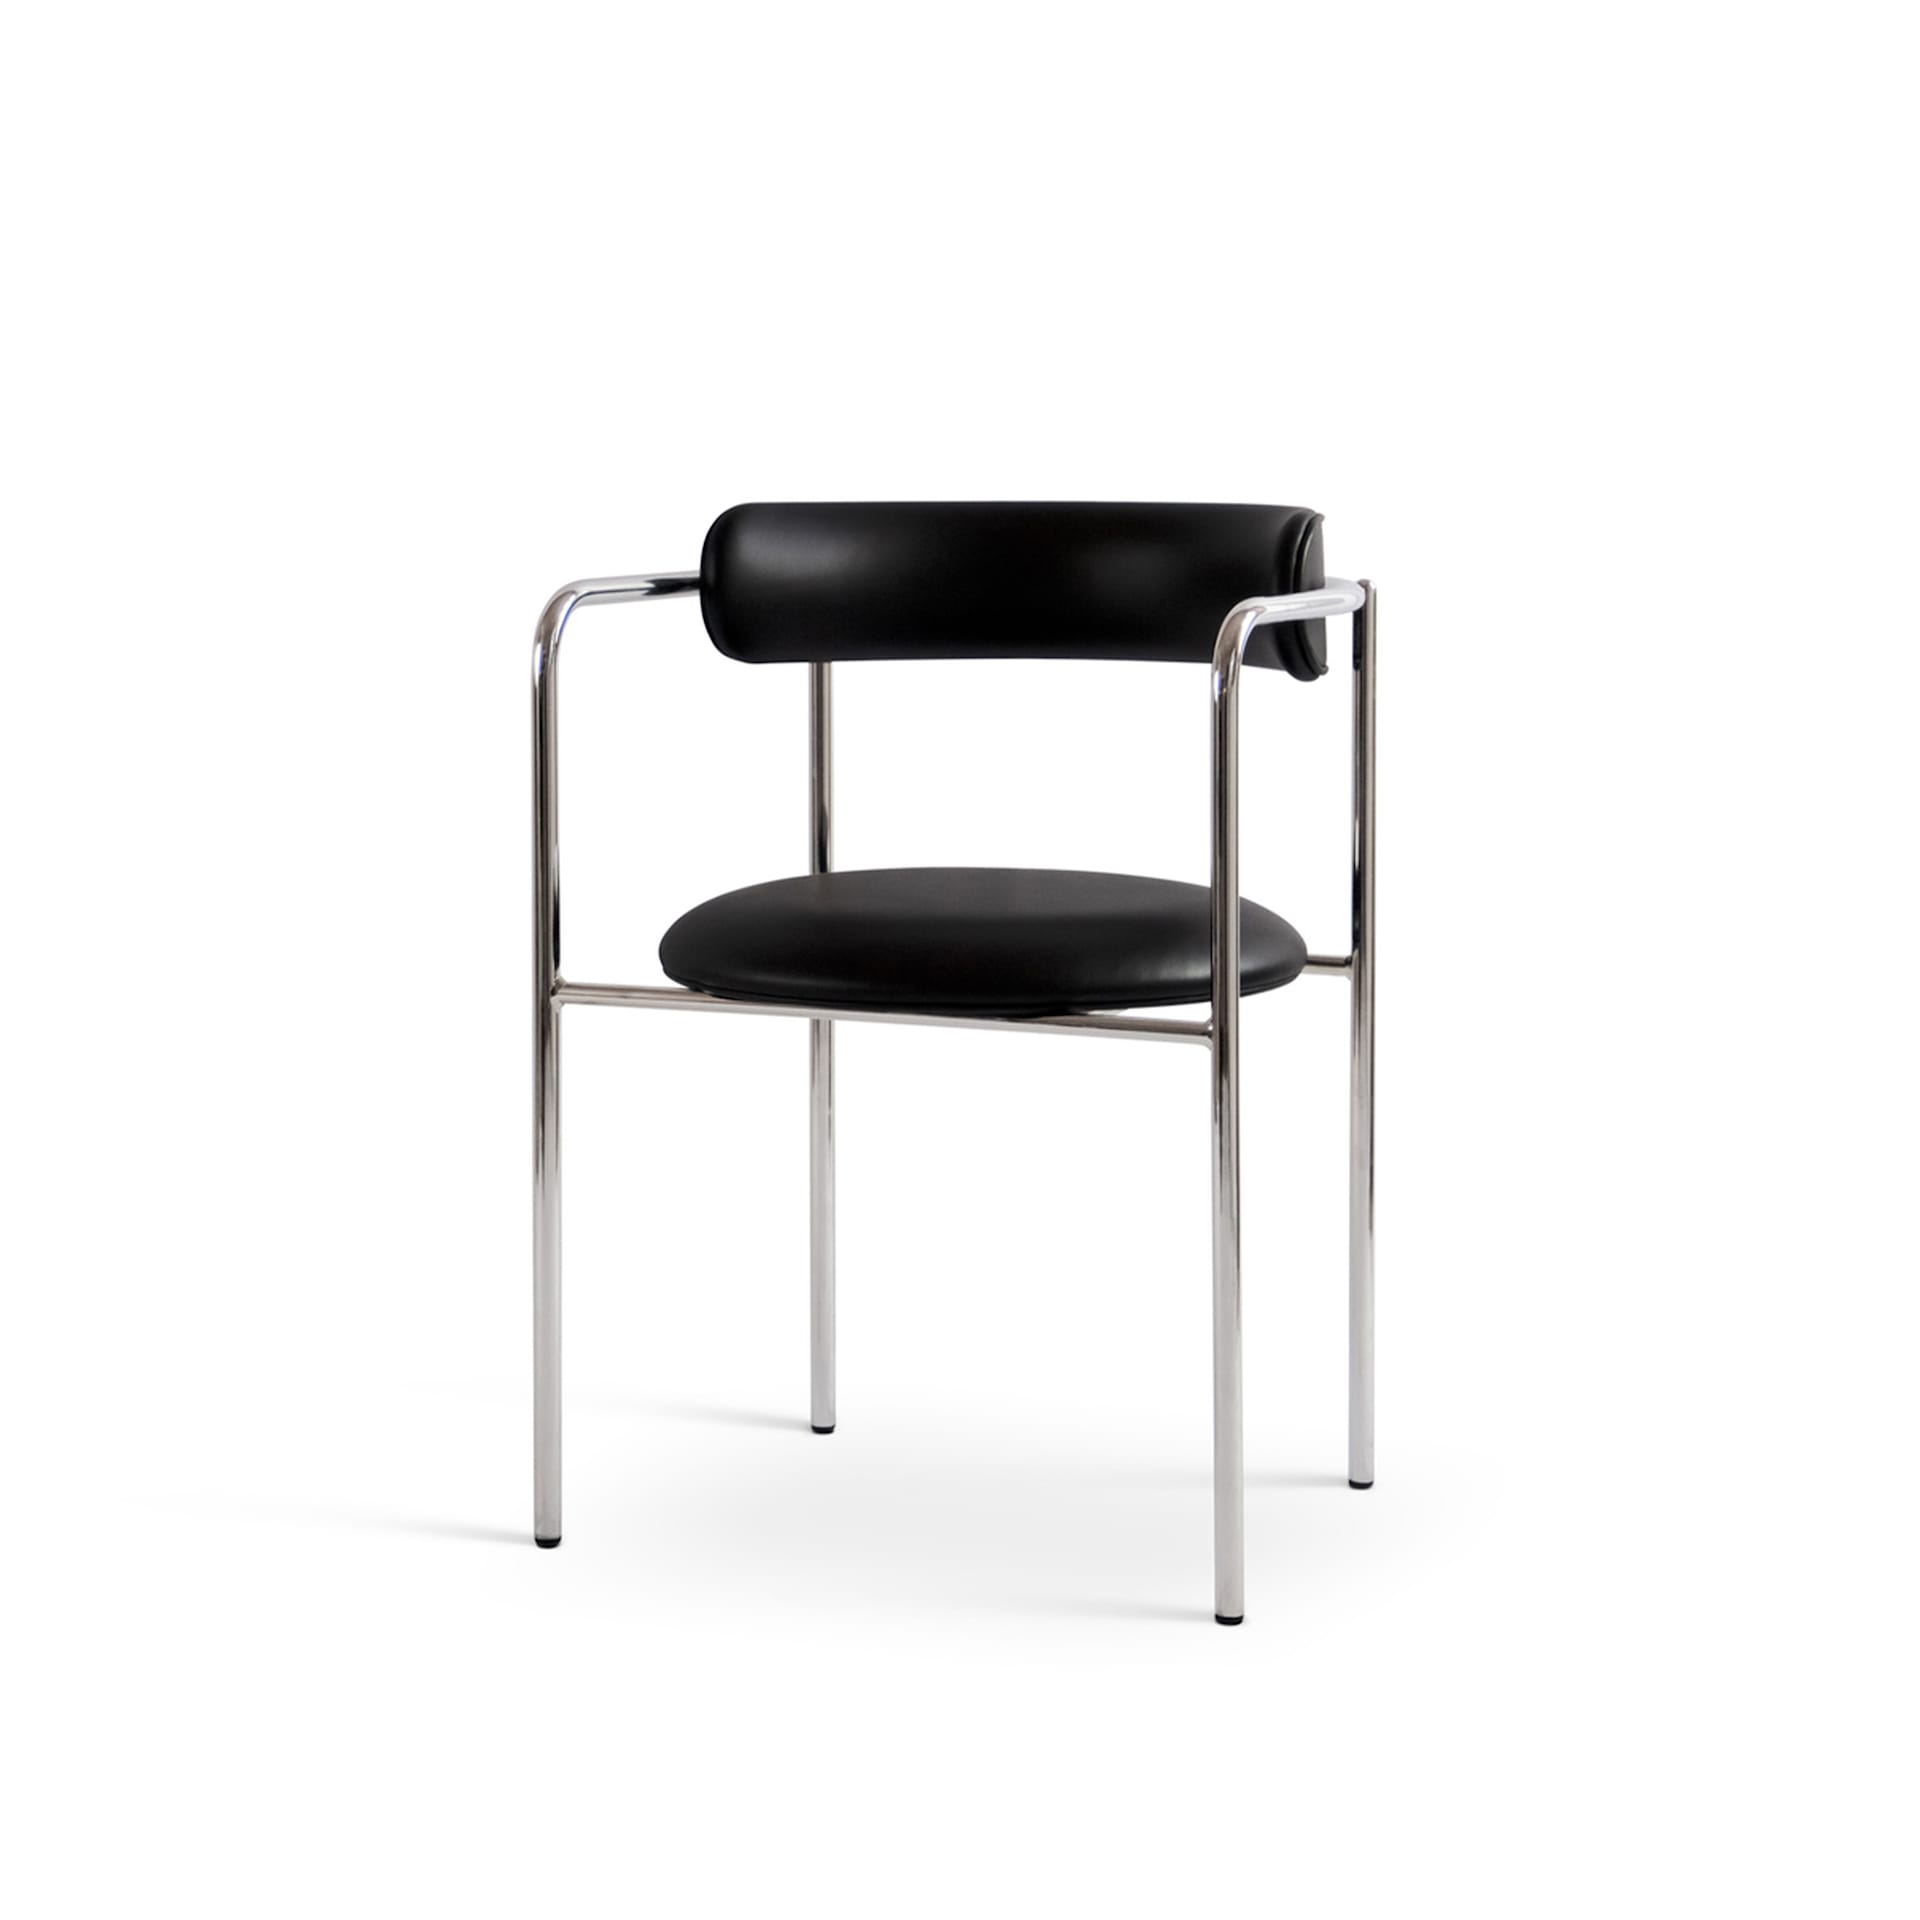 FF Chair Rounded Chrome Legs - Friends & Founders - NO GA